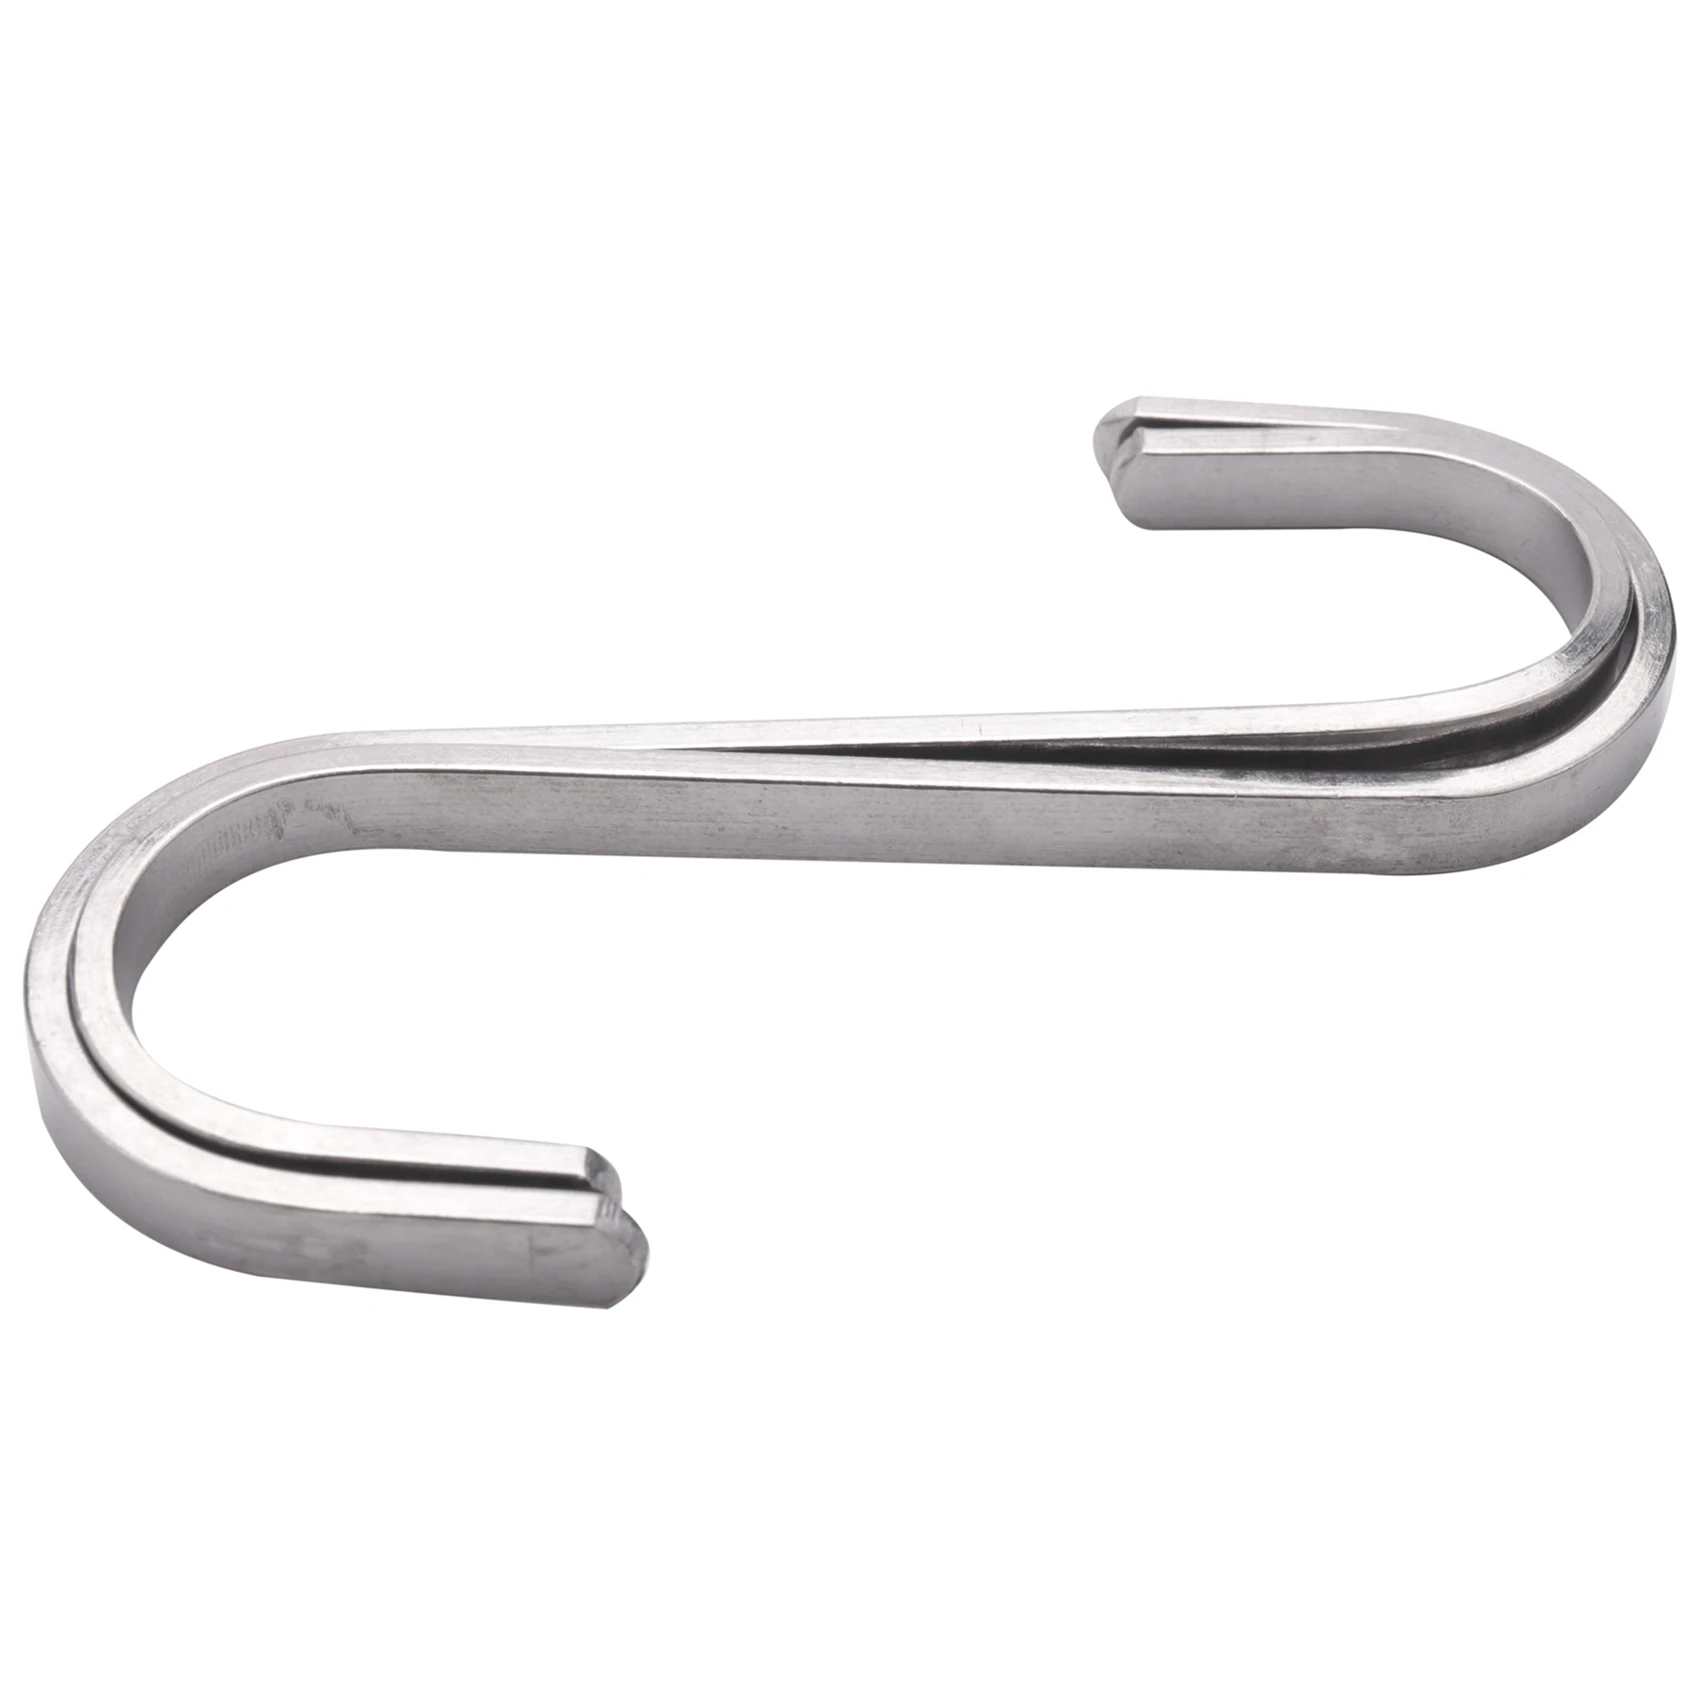 

Set of 10 S Stainless Steel Suspension Hooks for Kitchen Cookware or Butcher Meat